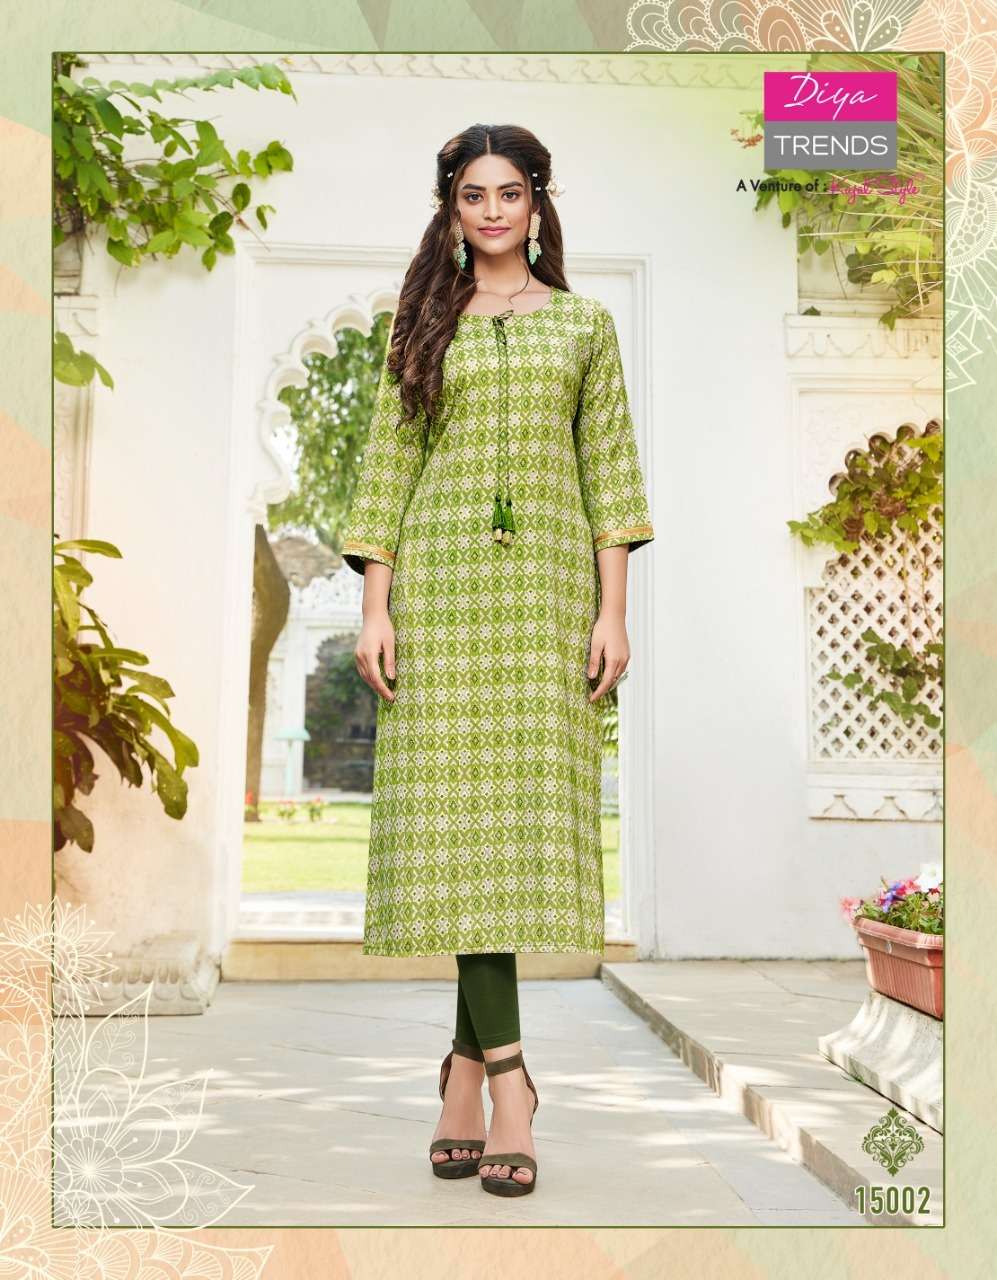 Mittoo Palak Vol 36 New Designs Straight Kurti Fancy Collection Suppliers